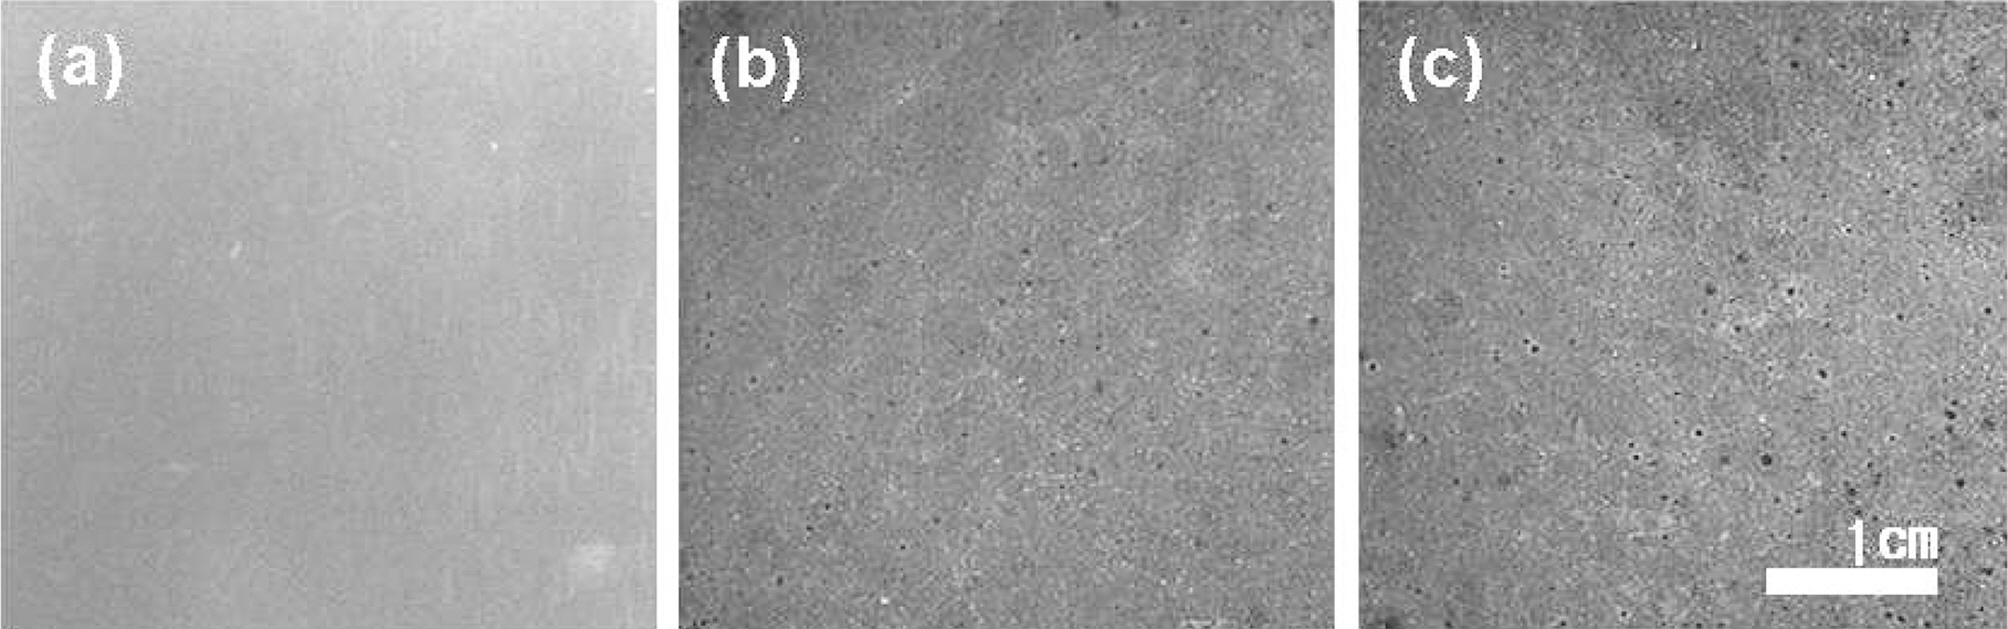 Overall surface images of IG-110 as a function of oxidation degrees; (a) 0% (b) 5% (c) 10% wt. loss.